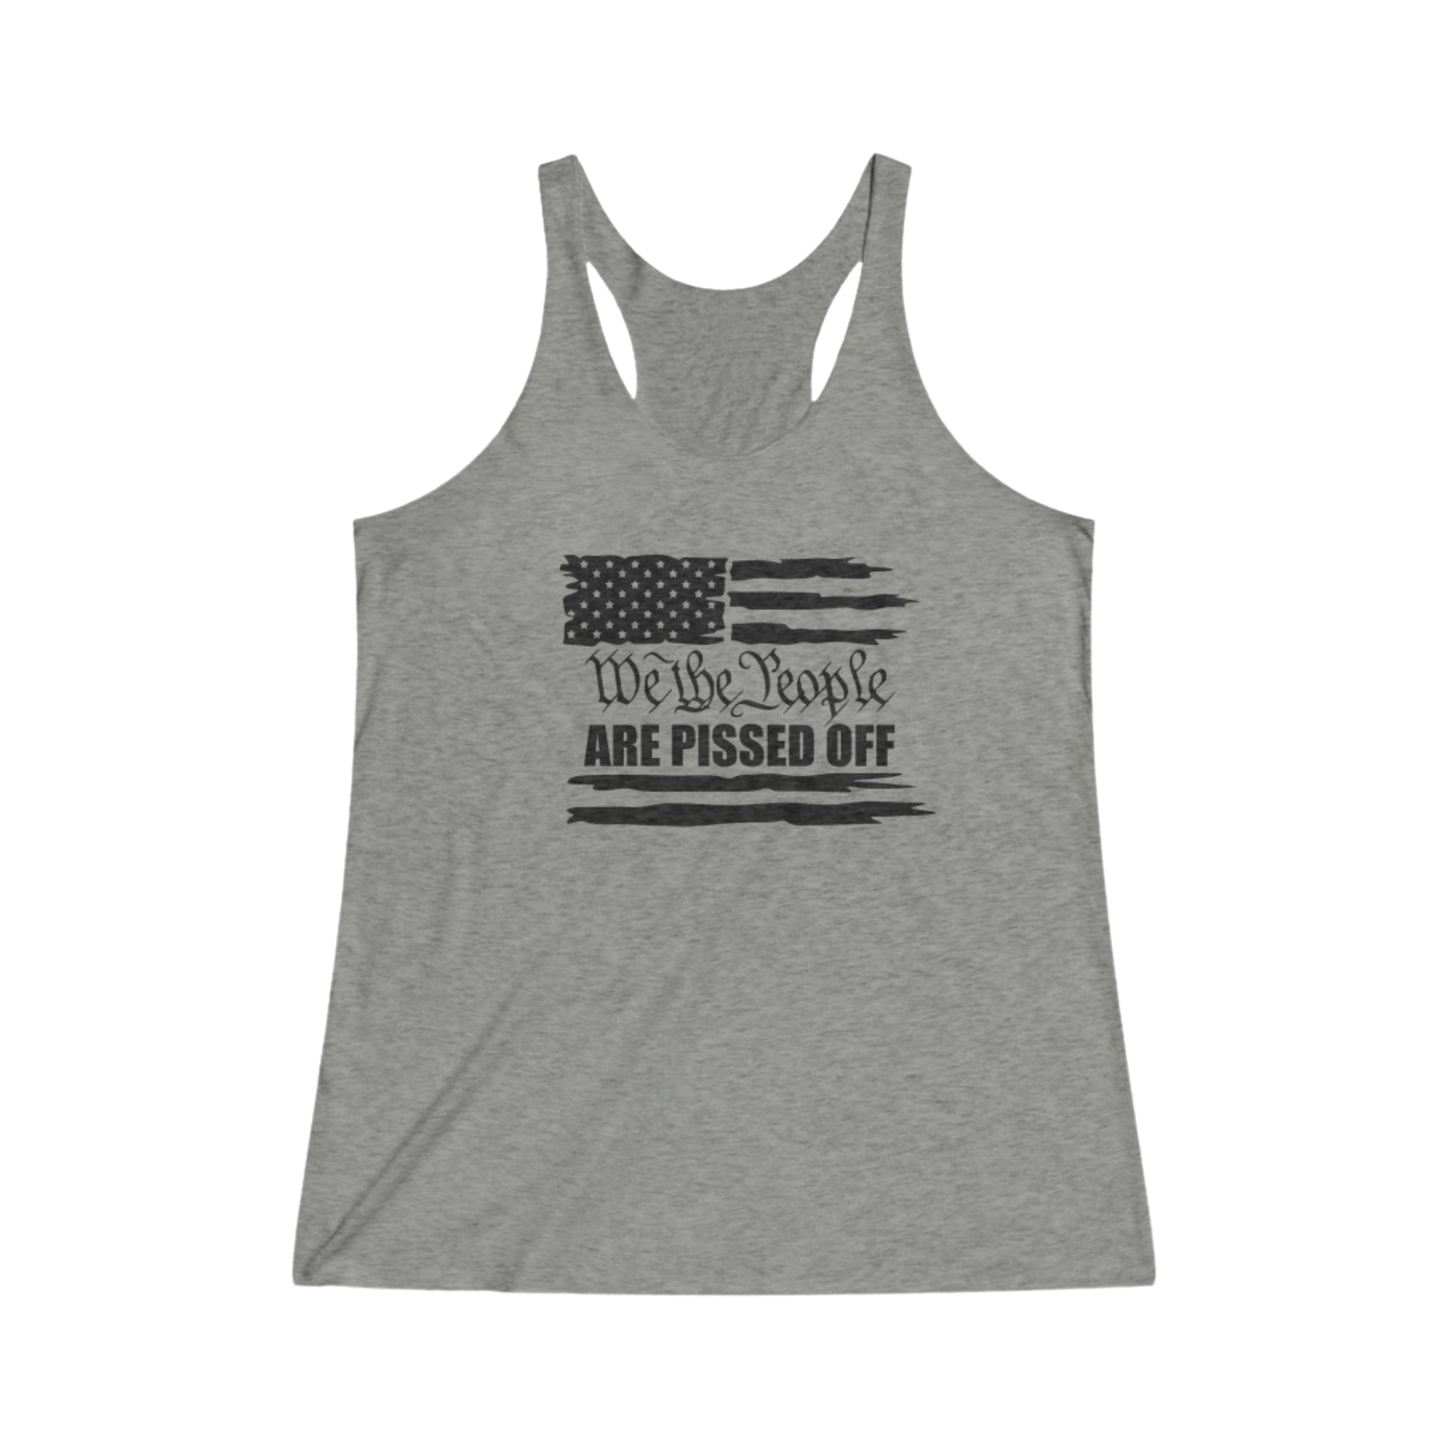 We The People Are Pissed Off Thin Racerback Tank Women's Venetian Gray - front